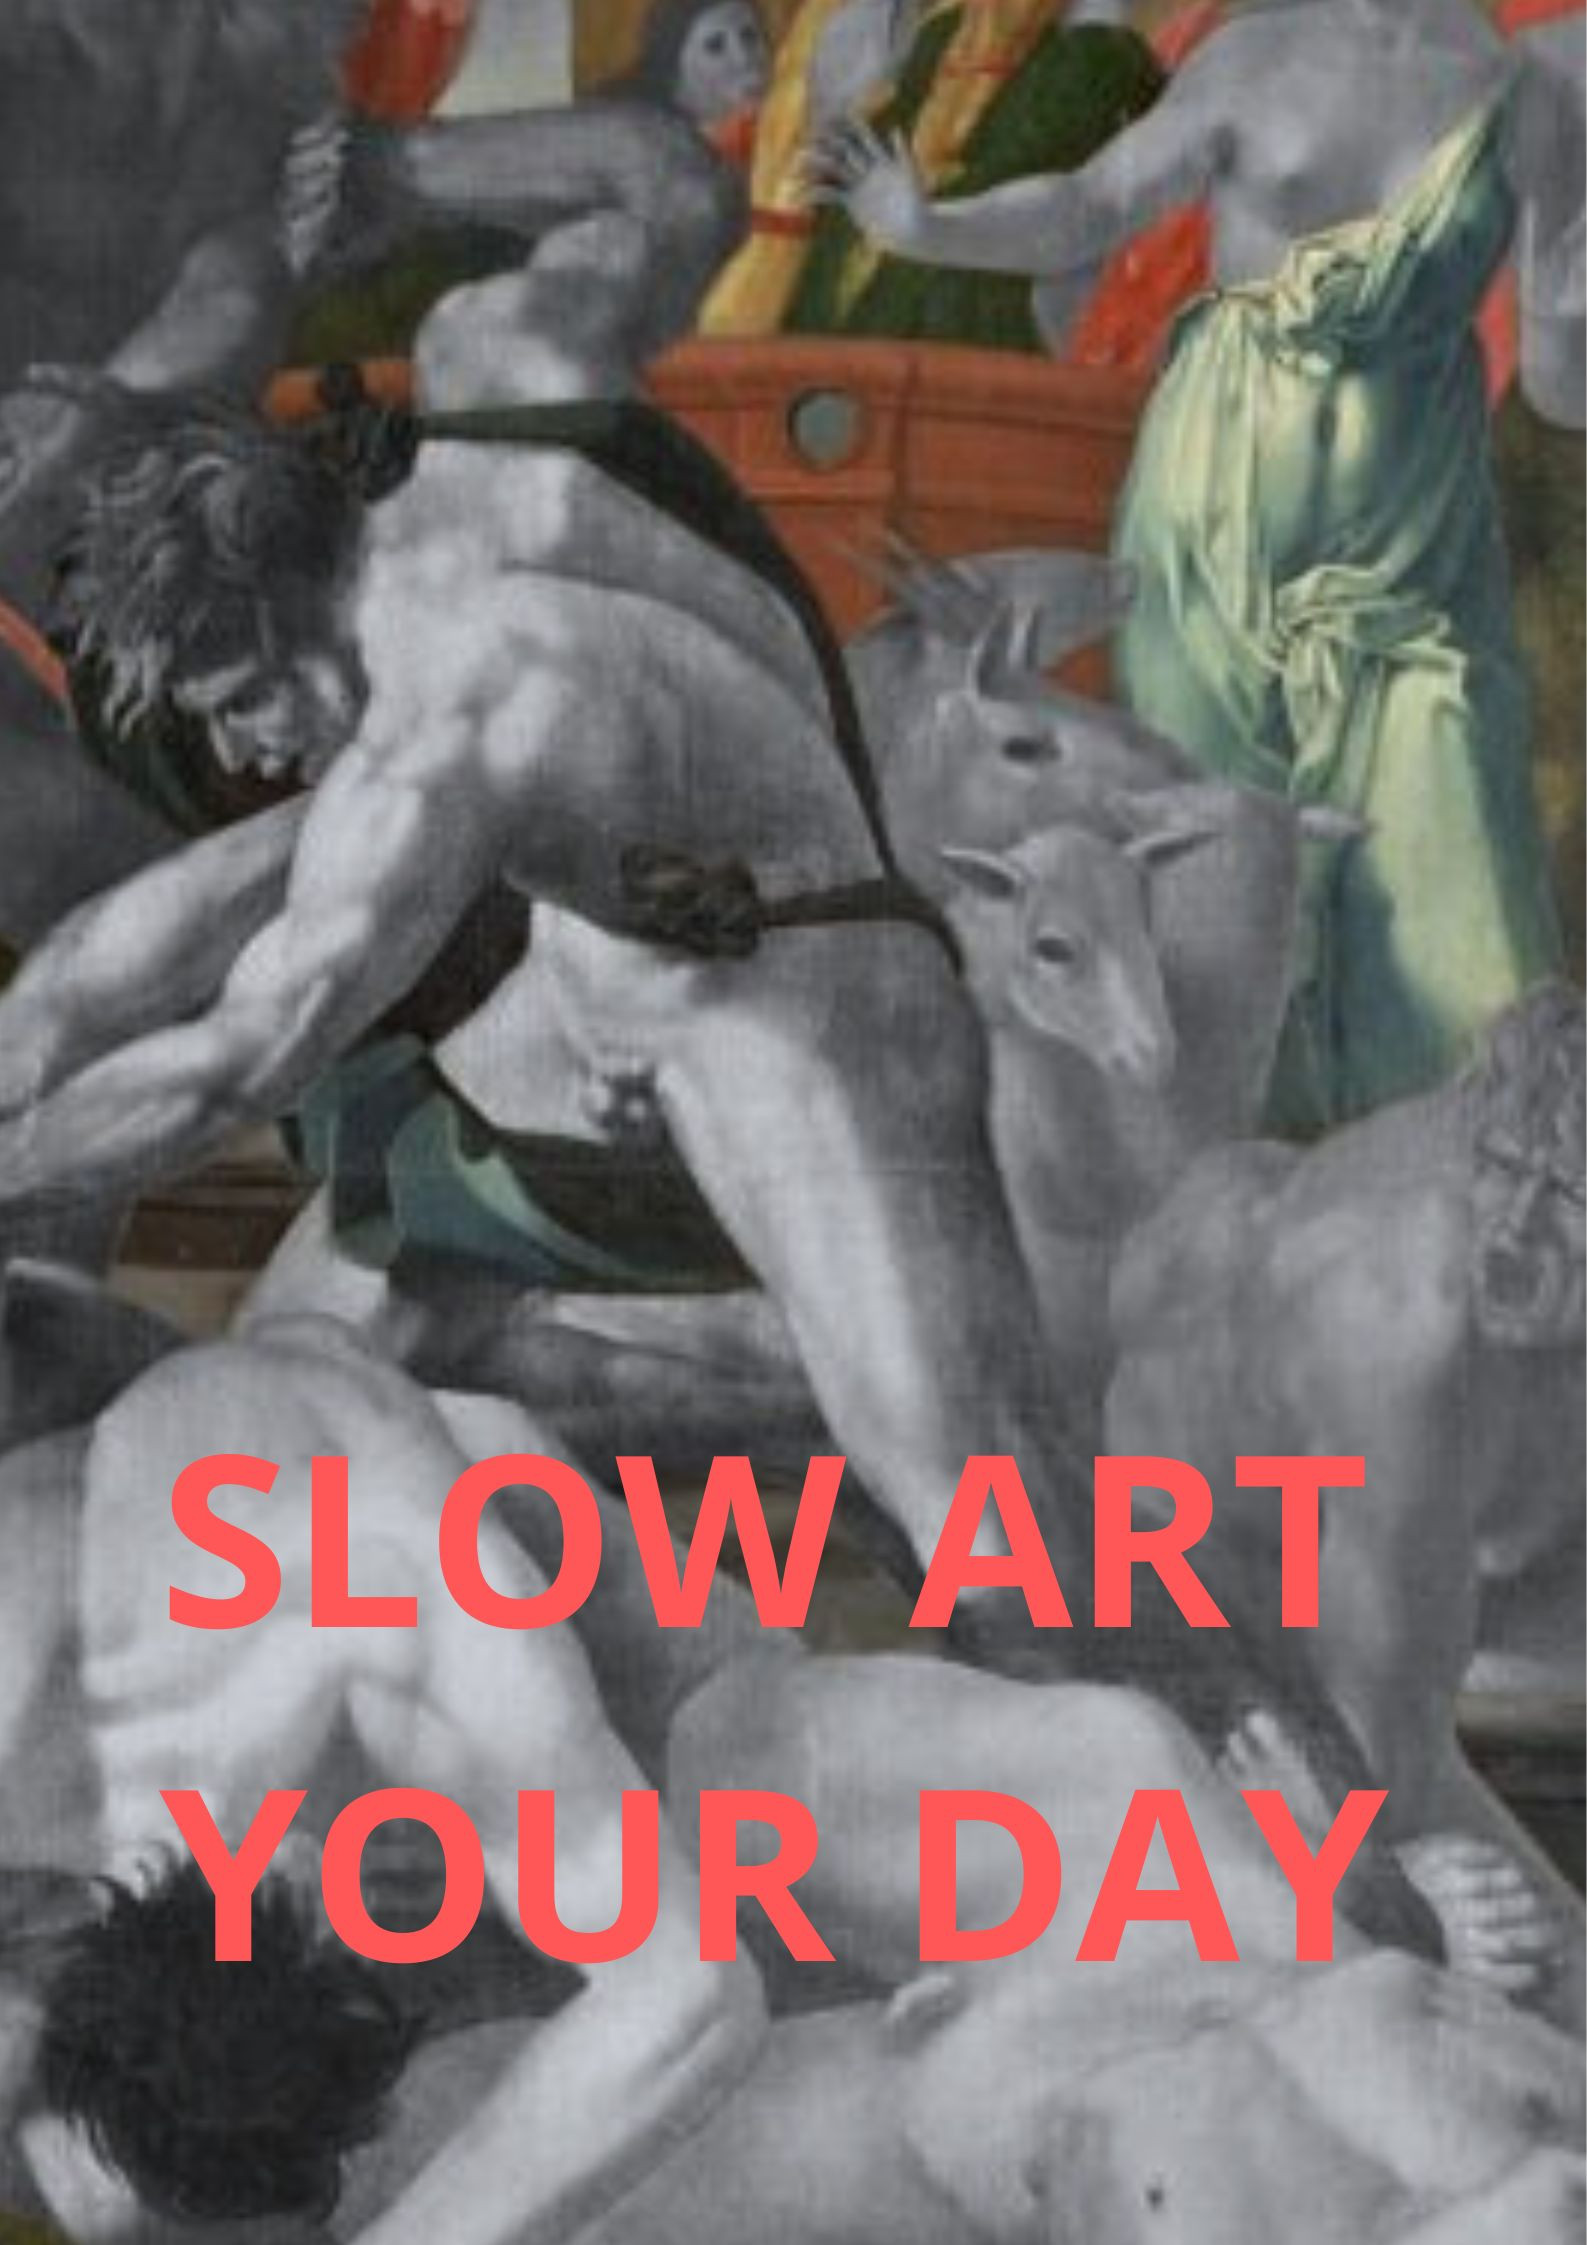 SLOW ART YOUR DAY